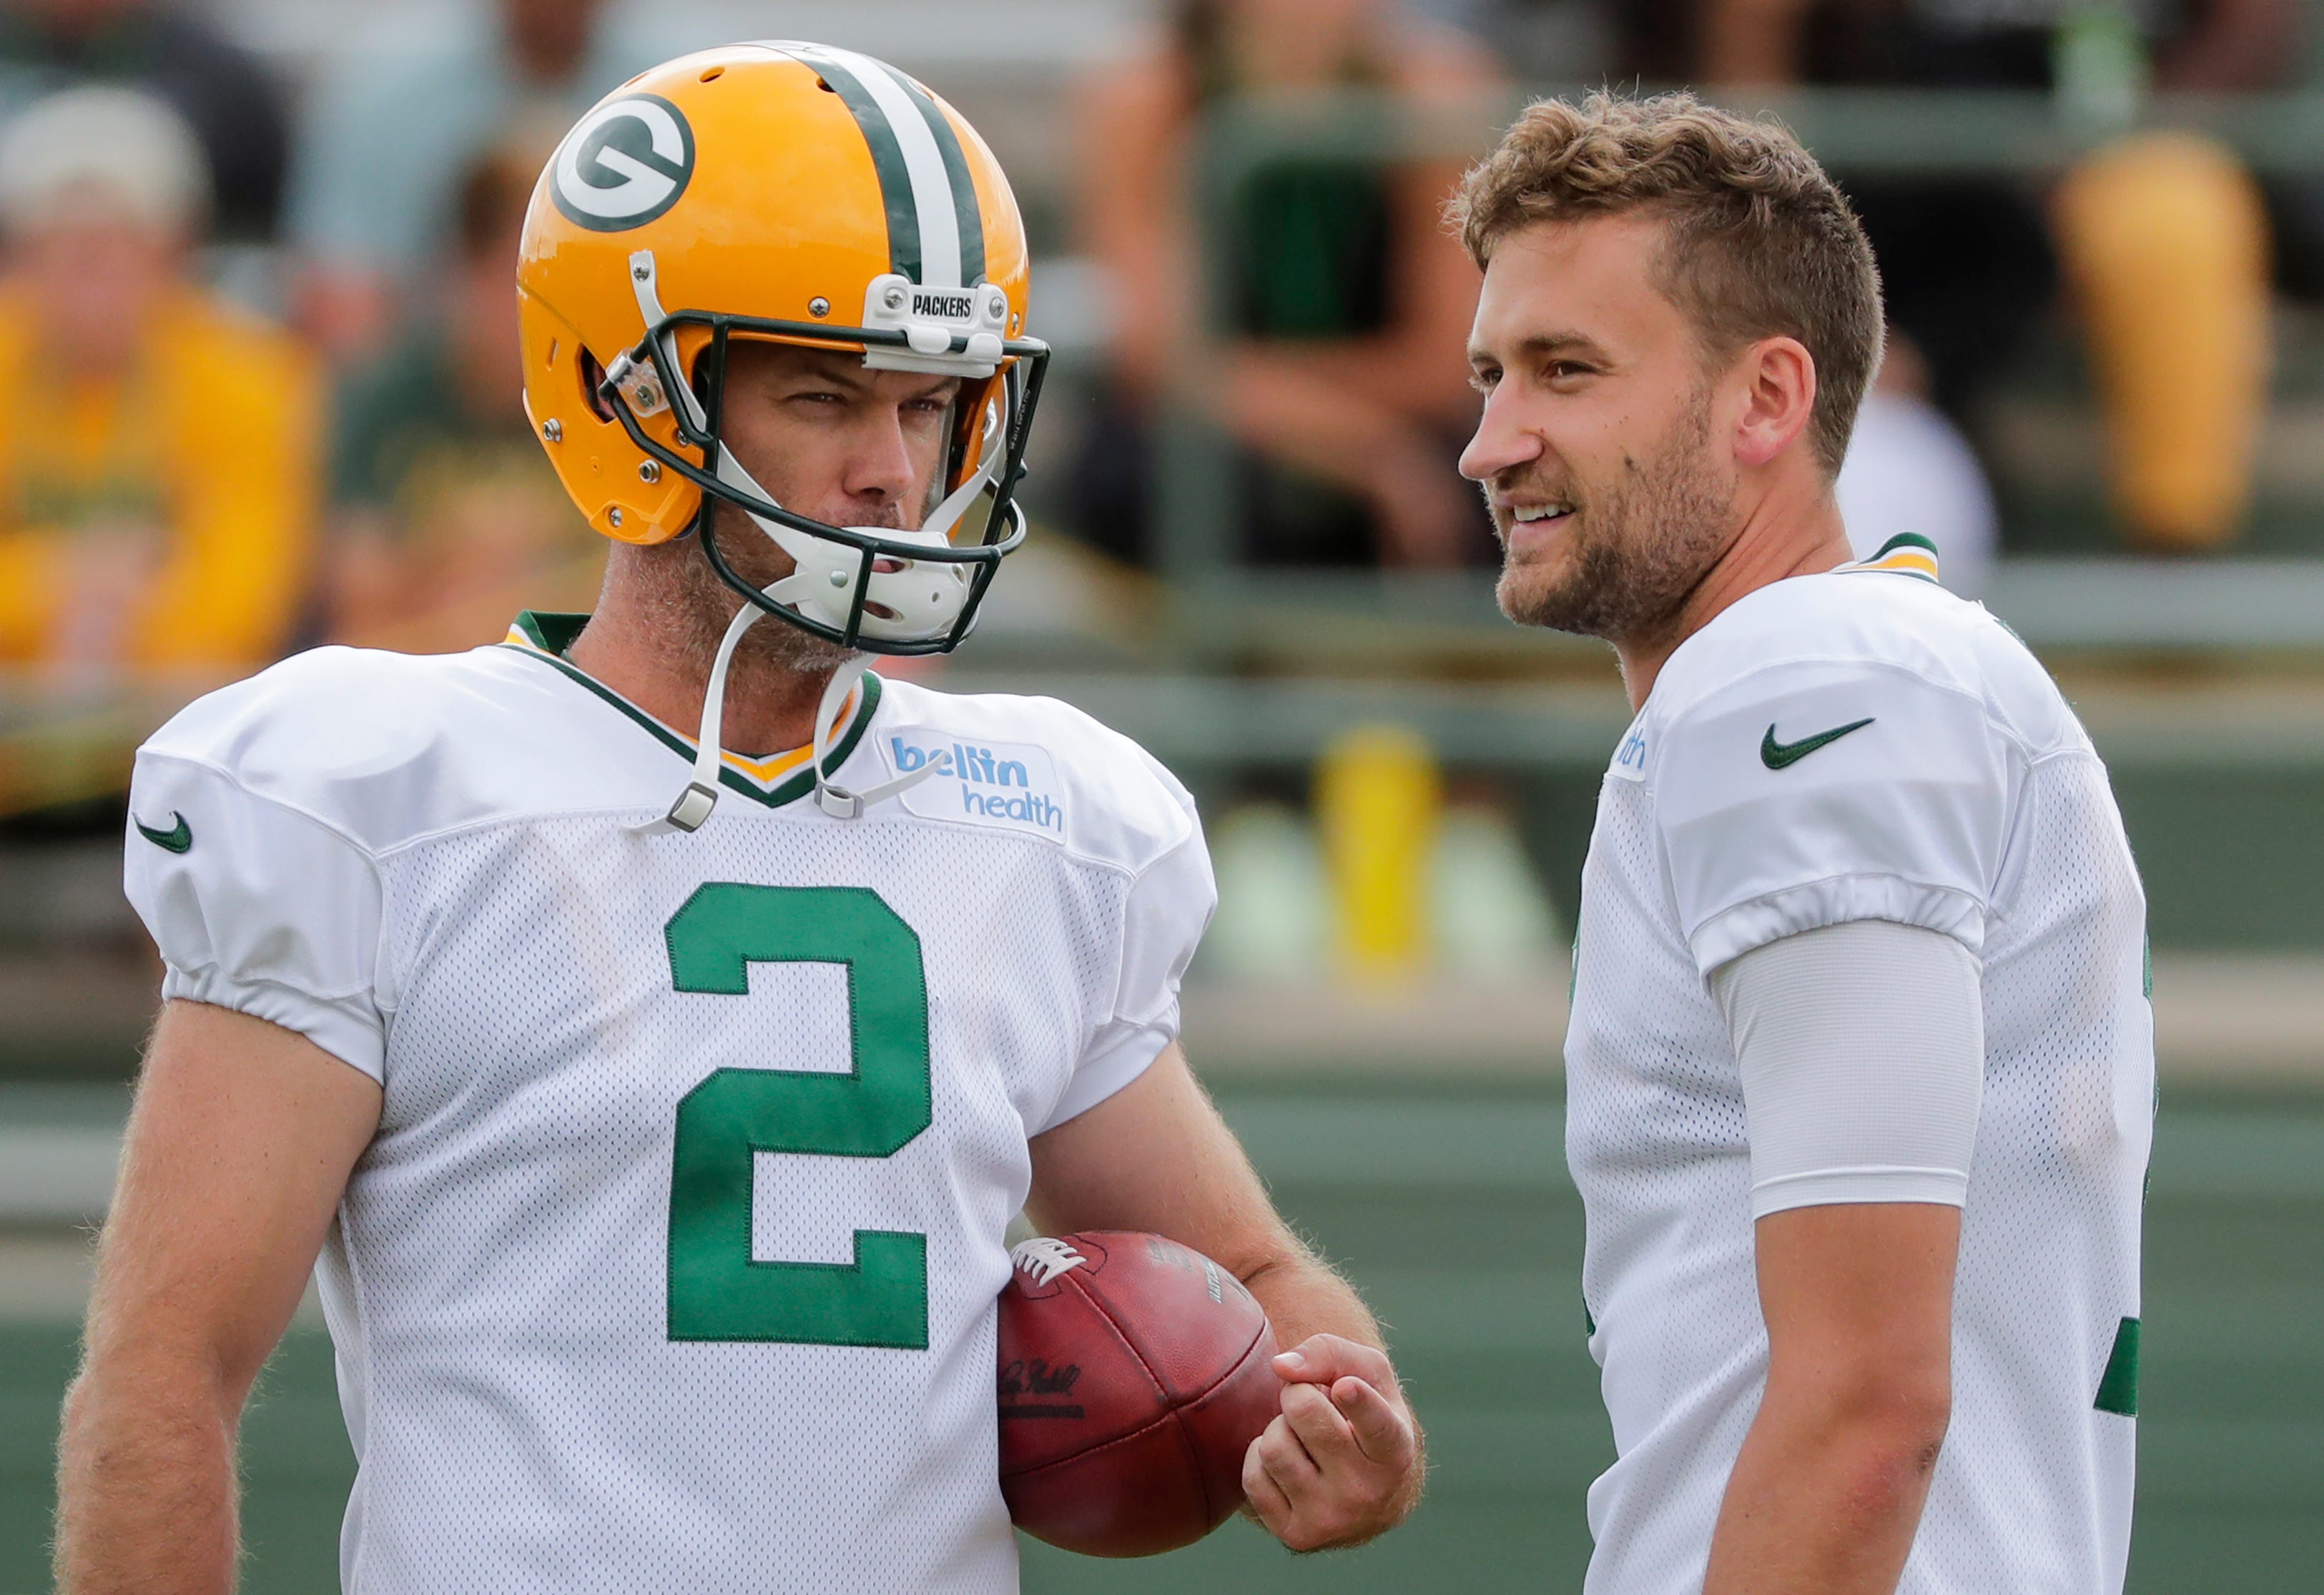 Green Bay Packers' Mason Crosby and Sam Ficken talk during training camp practice Tuesday, August 13, 2019, at Ray Nitschke Field in Ashwaubenon, Wis.